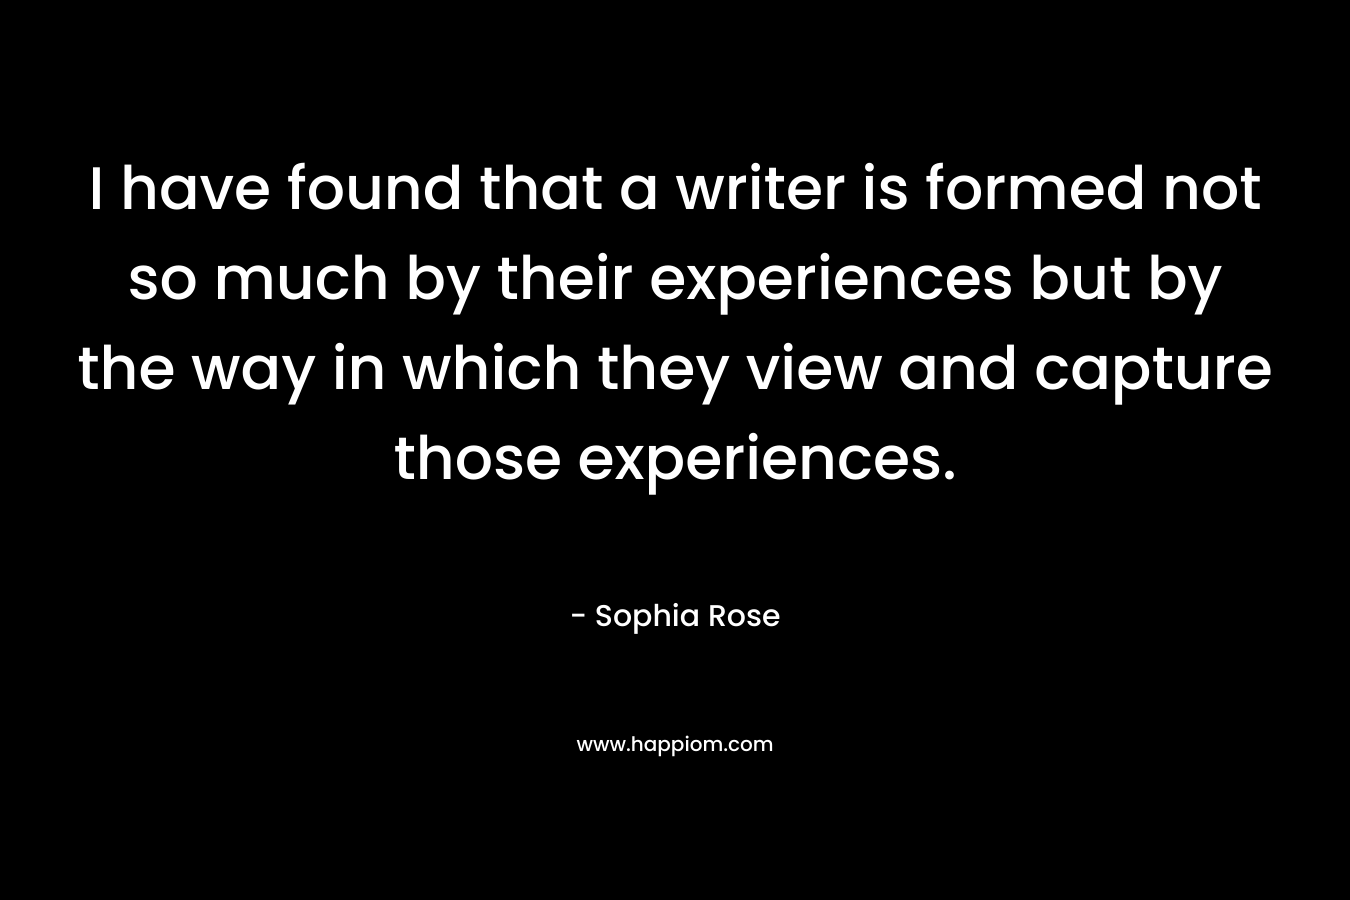 I have found that a writer is formed not so much by their experiences but by the way in which they view and capture those experiences.